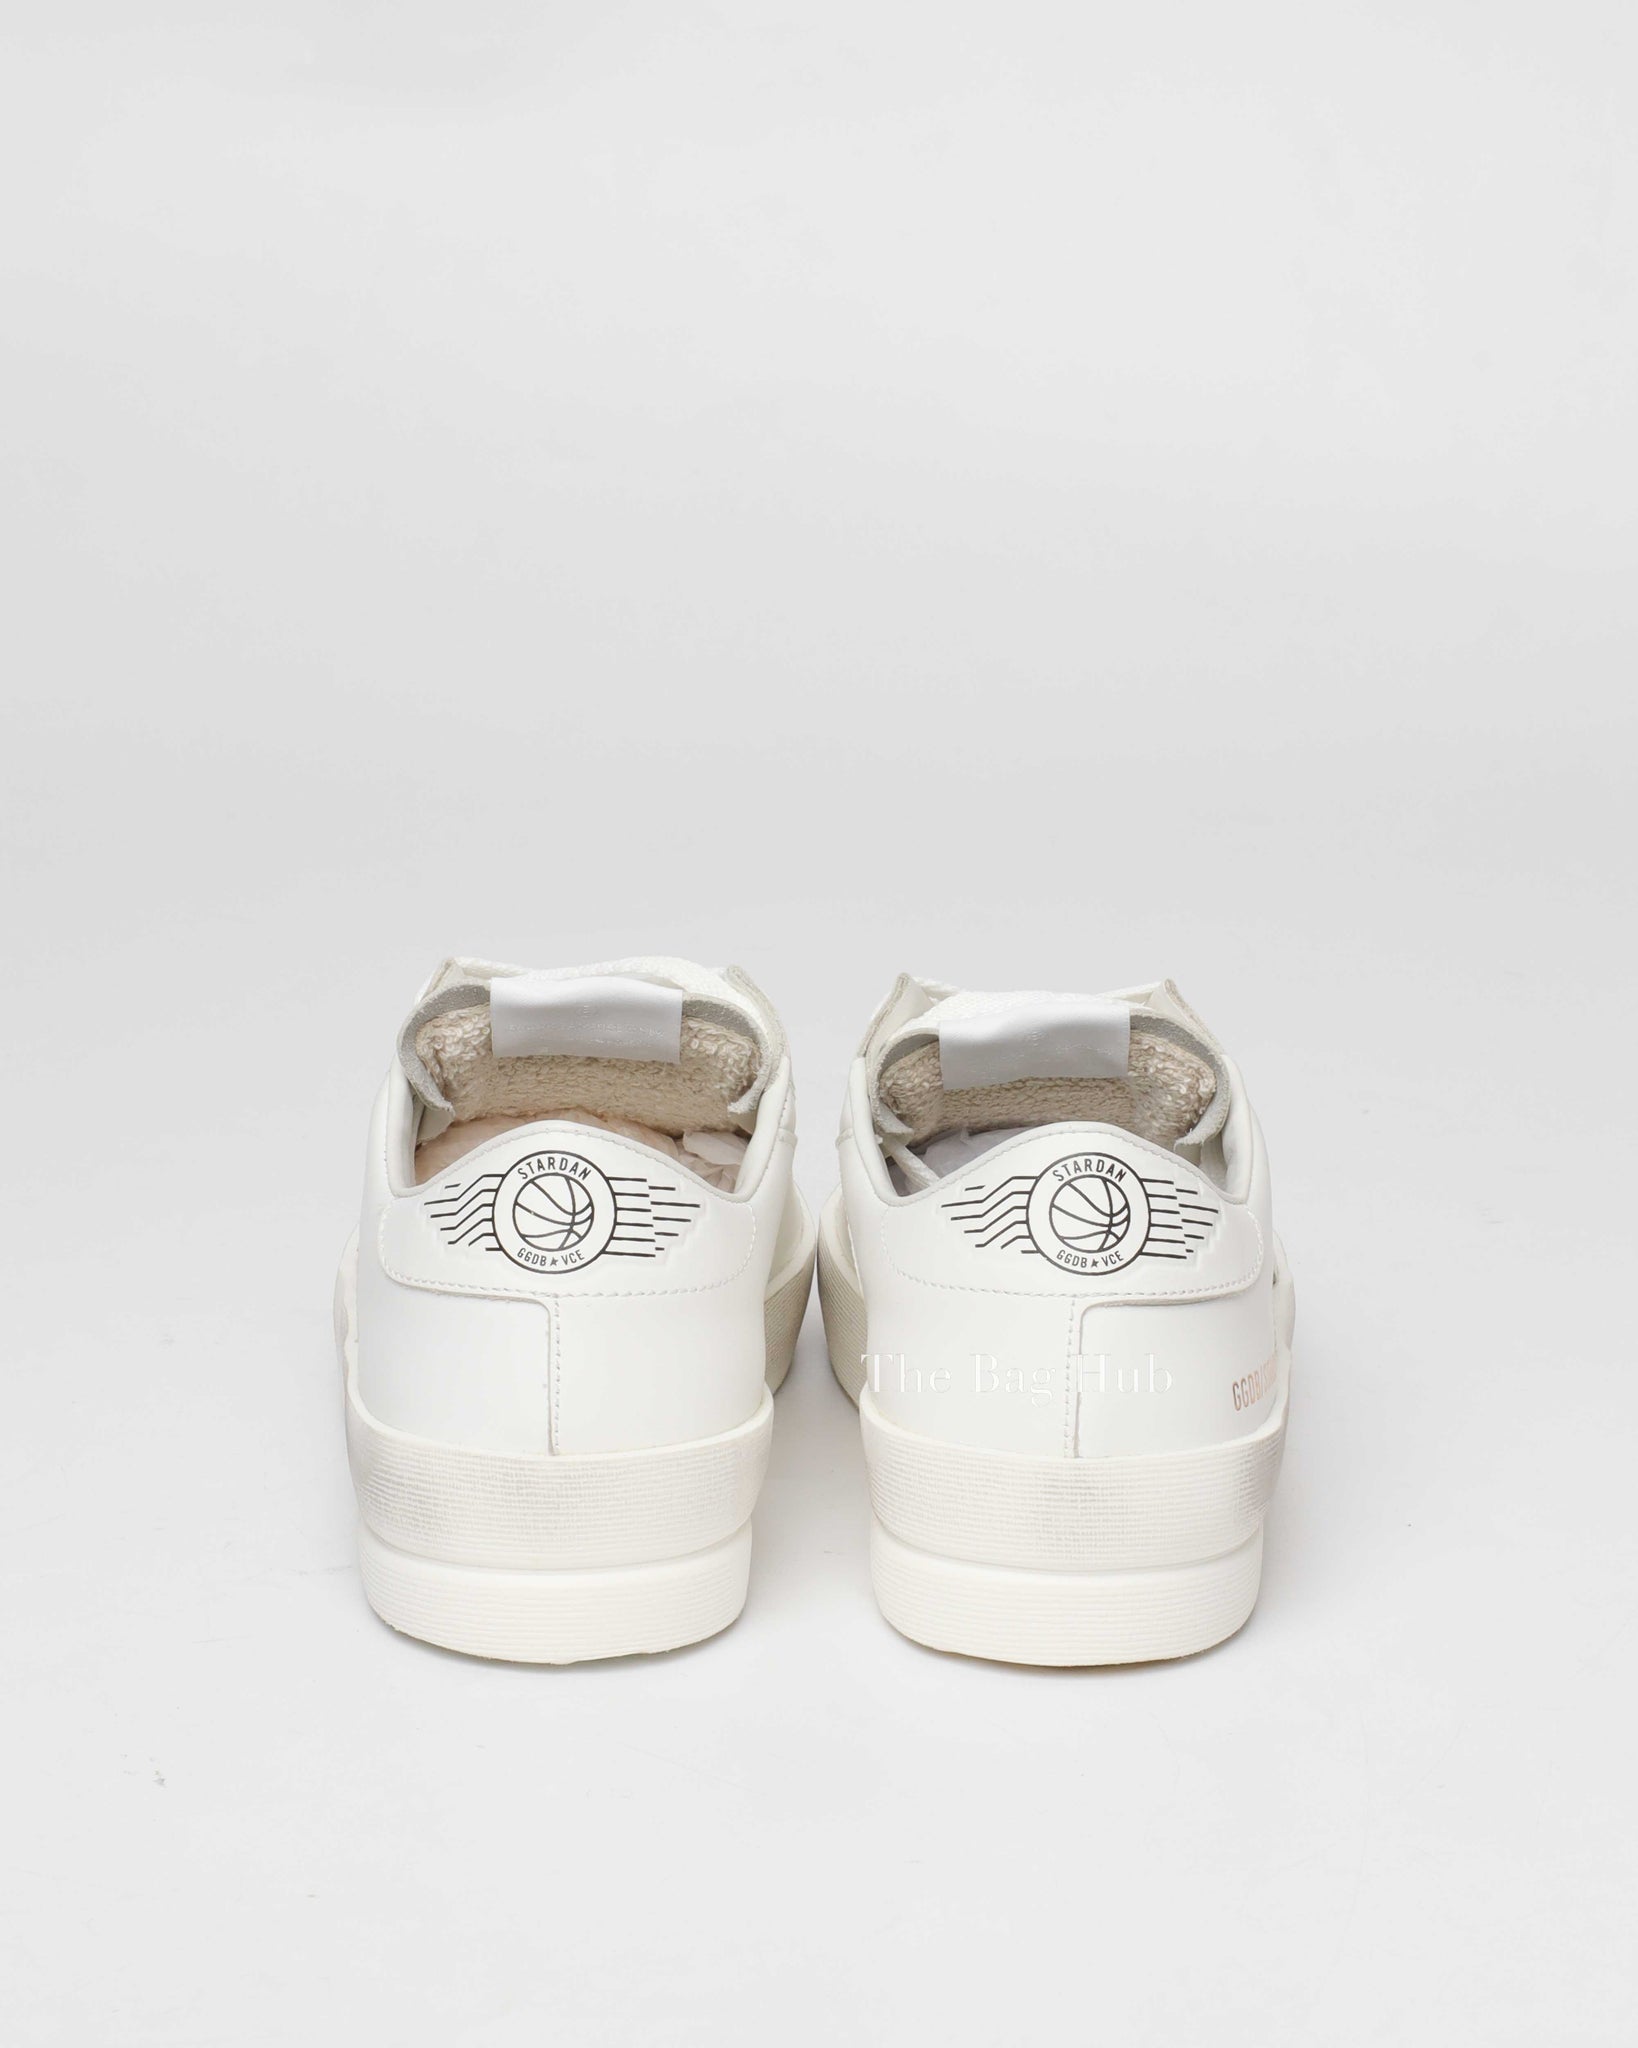 Golden Goose White Leather Stardan Sneakers Size 36-7